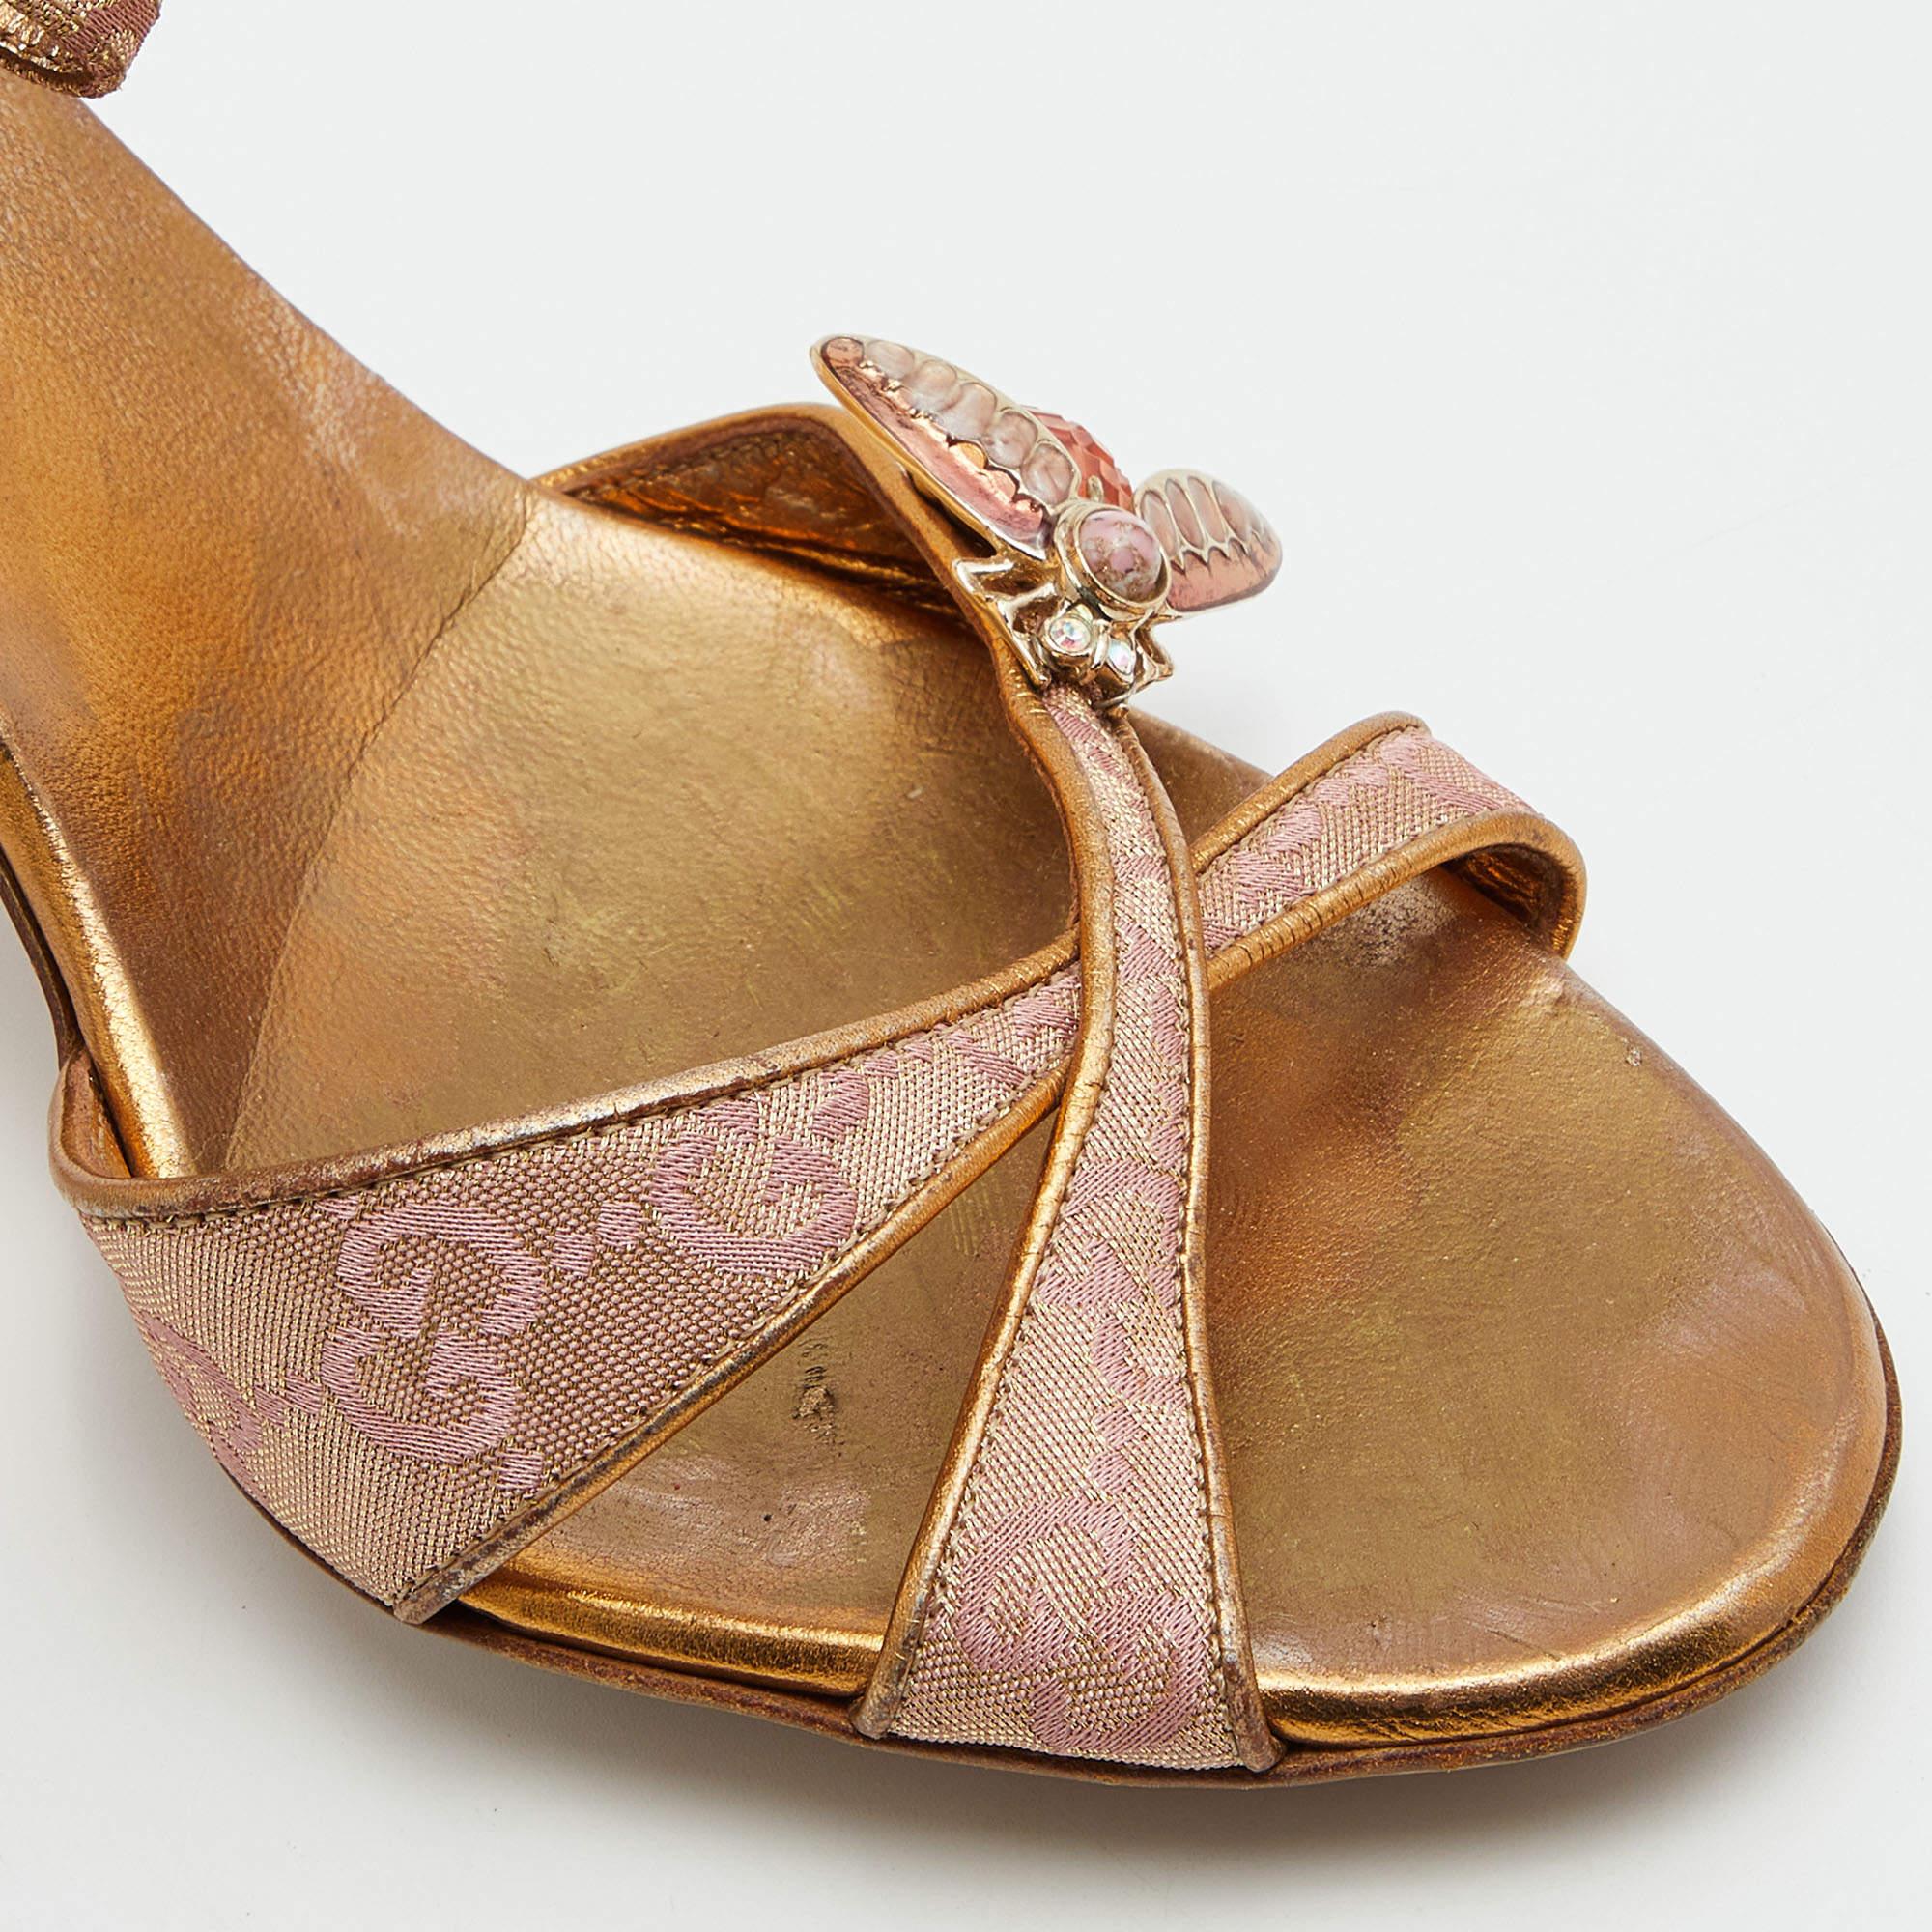 Gucci Metallic Gold Brocade Fabric Bee Embellished Ankle Strap Sandals Size 37 For Sale 3